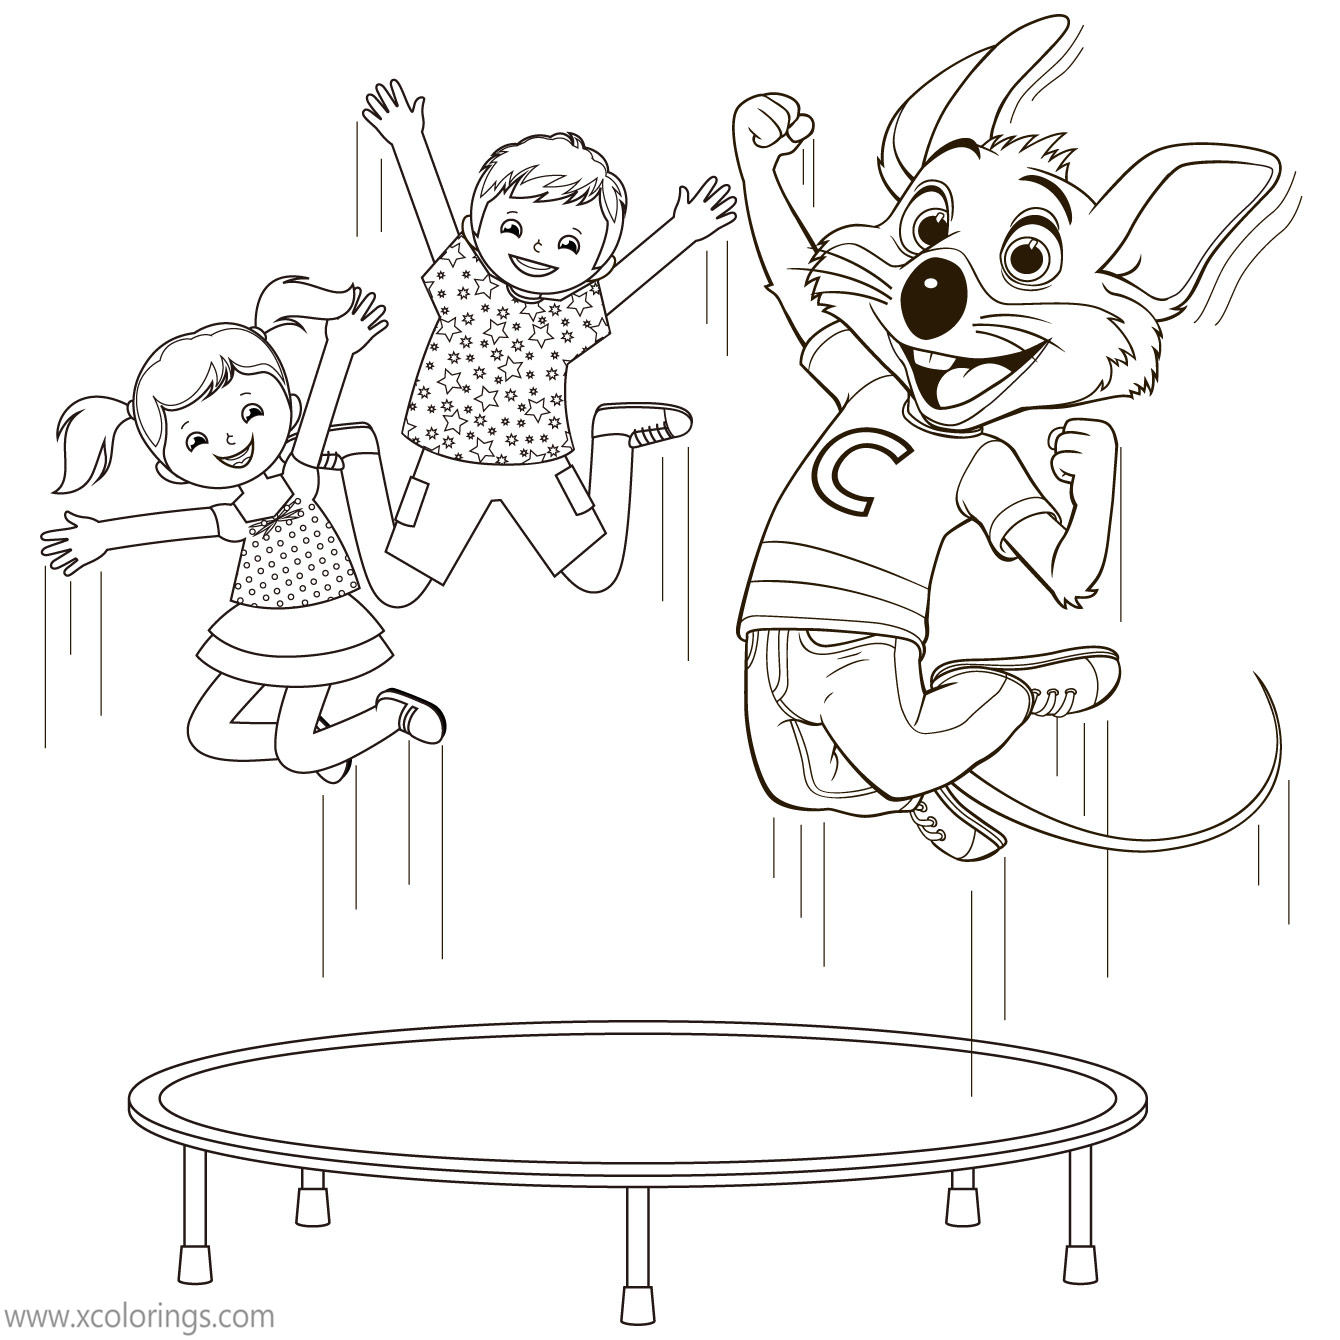 Free Chuck E Cheese Coloring Pages Chuck E & Friends printable